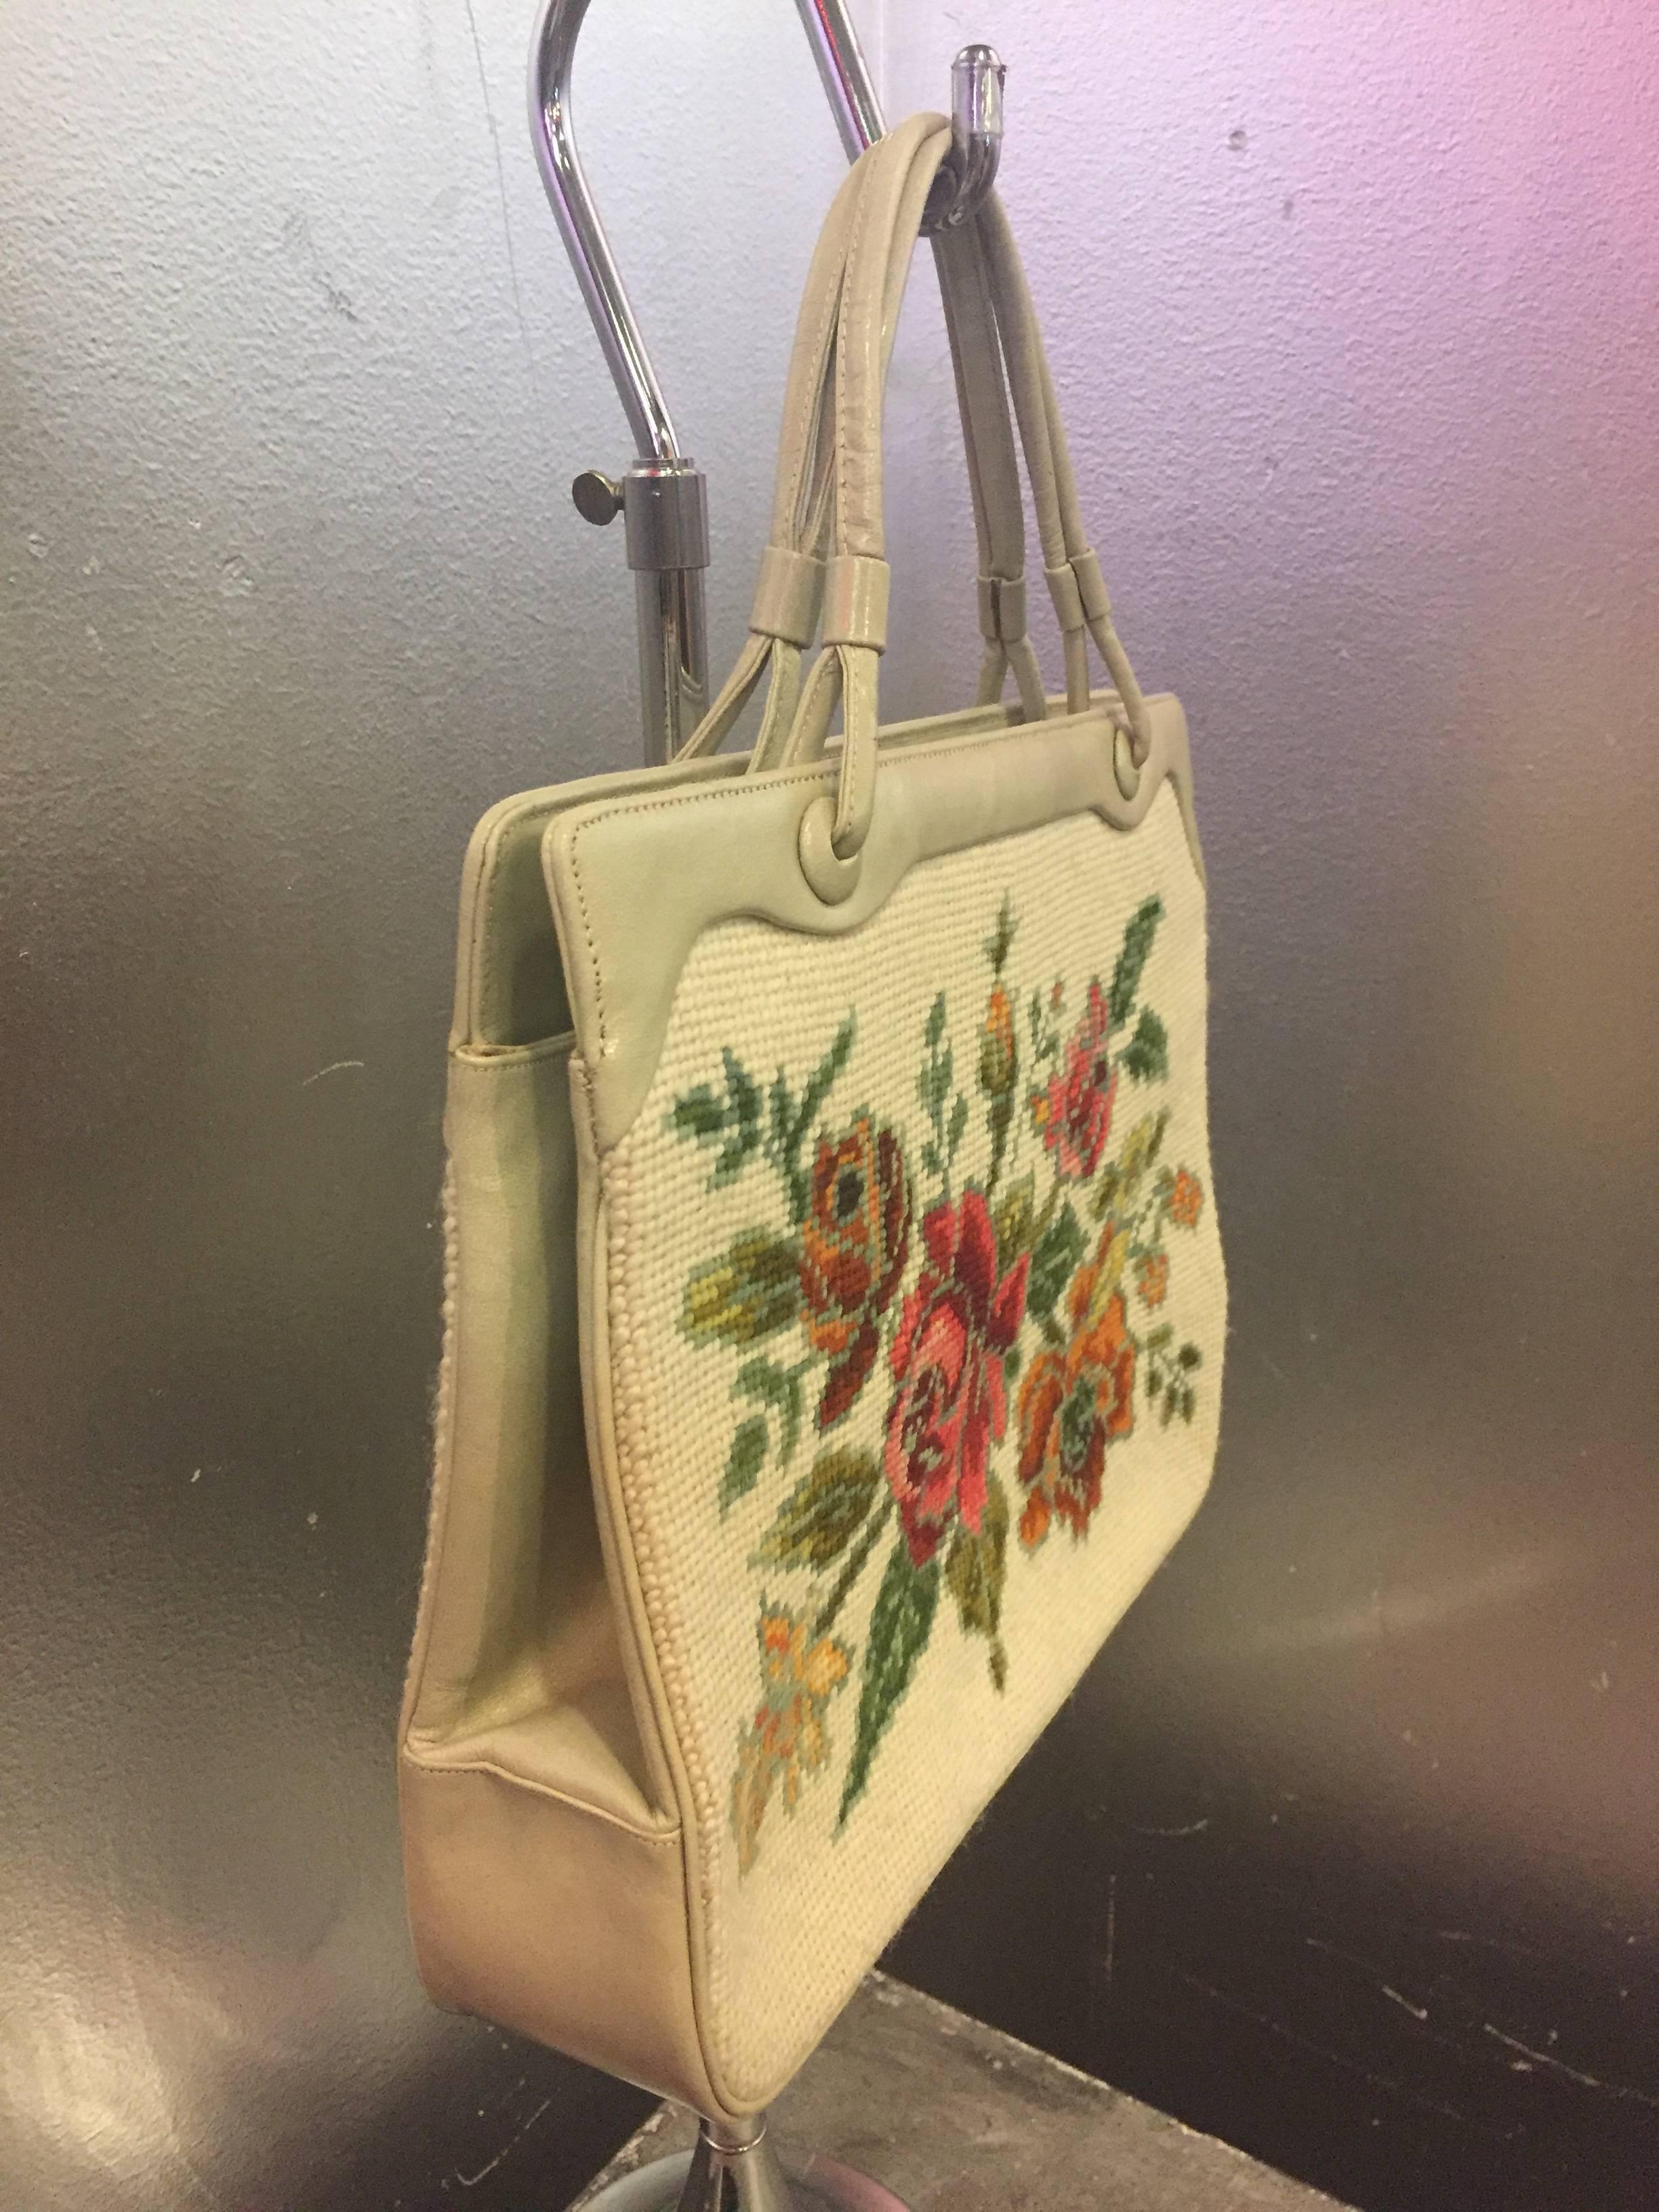 A stunning bouquet of colorful needlepoint roses set against bone leather trim. Bag features double-rolled leather handles with brass feet. Interior is cream grosgrain in impeccable condition. 